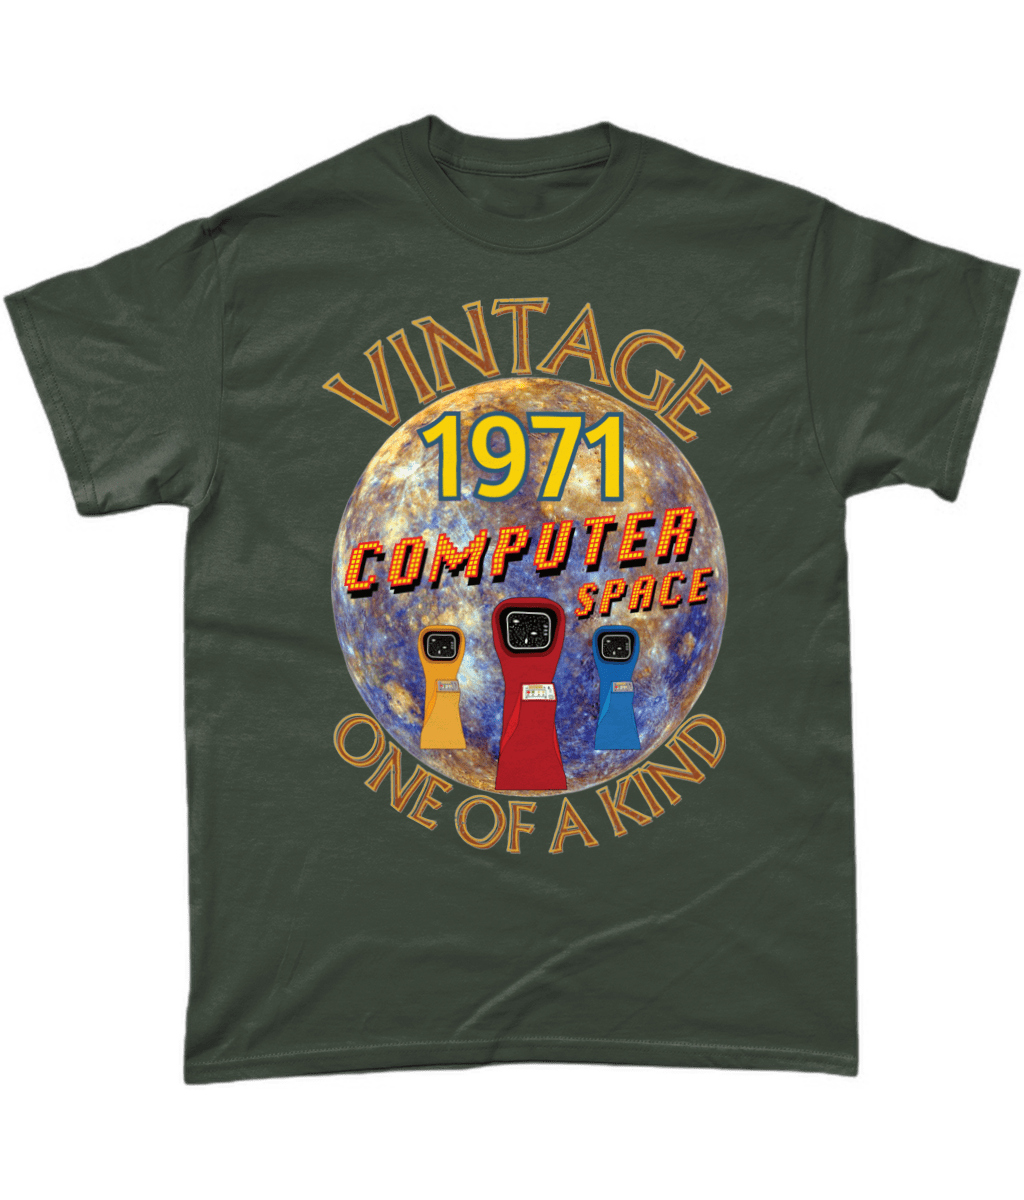 Green T-Shirt with the words vintage,1971,computer space,one of a kind,large earth, 3 computer space arcade machines